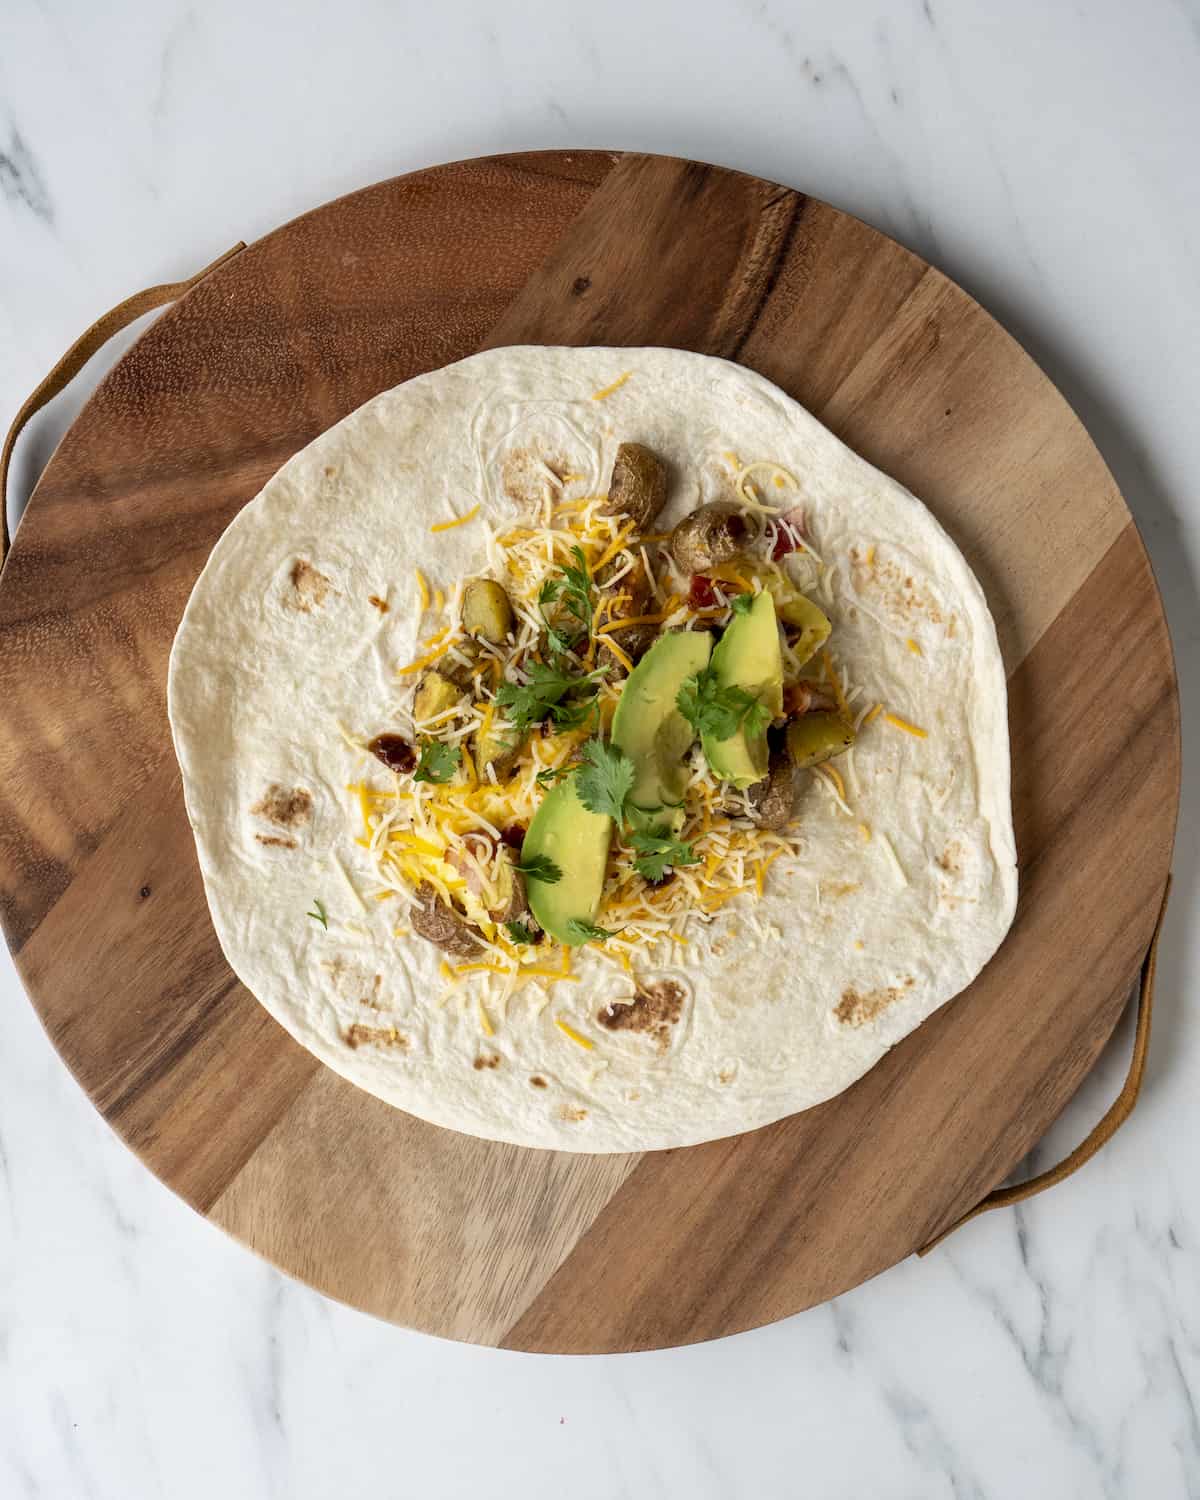 A flour tortilla with the the scrambled eggs, avocado, cheese, roasted potatoes, and cilantro sitting on a wooden cutting board.  